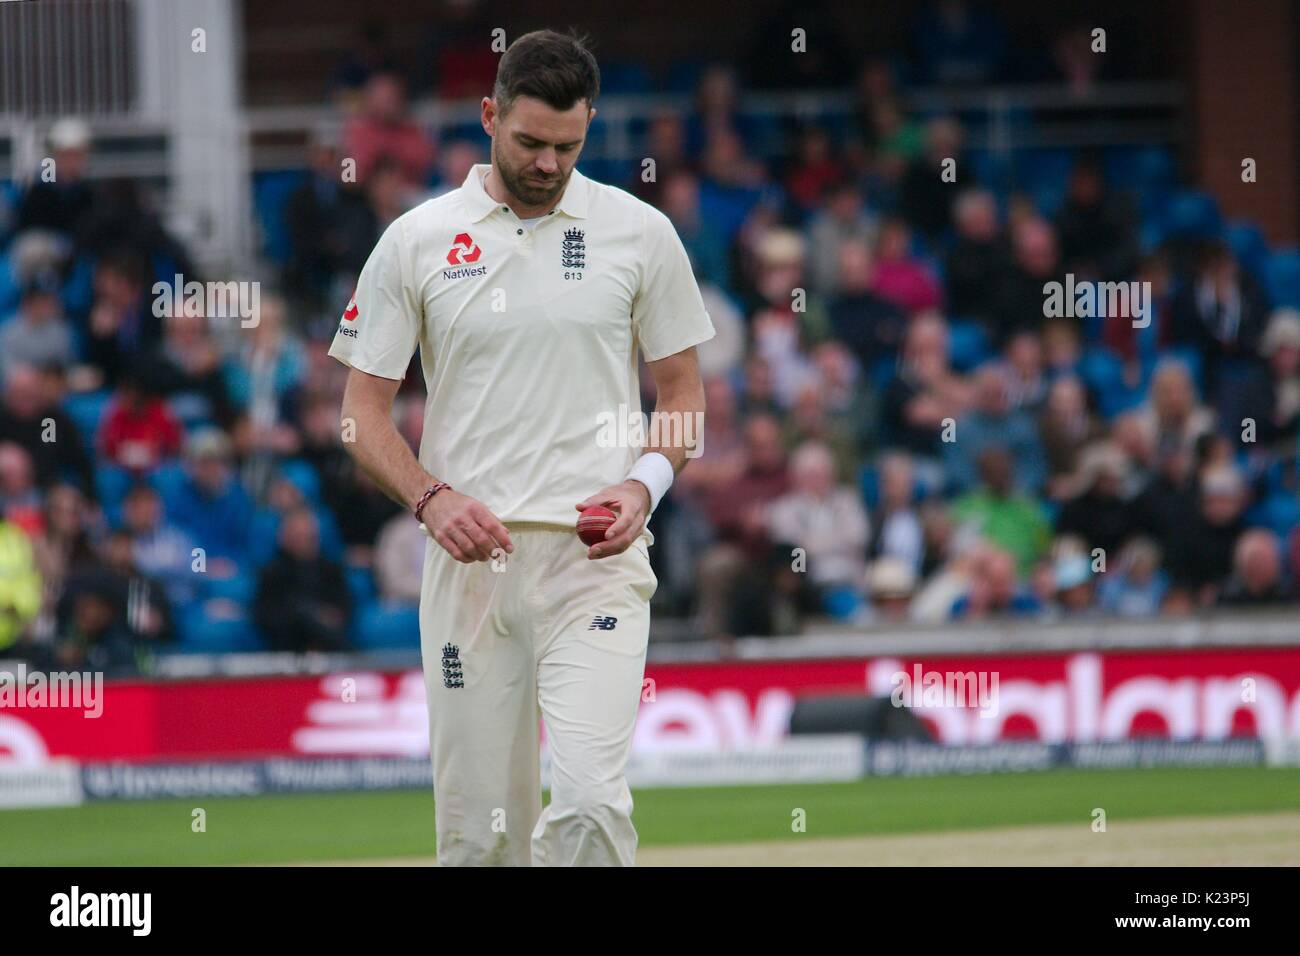 Leeds, UK. 29th Aug, 2017. Jimmy Anderson of England turning at the end of his run up to bowl against West Indies on the last day of the second Investec Test Match at Headingley Cricket Ground. Credit: Colin Edwards/Alamy Live News Stock Photo